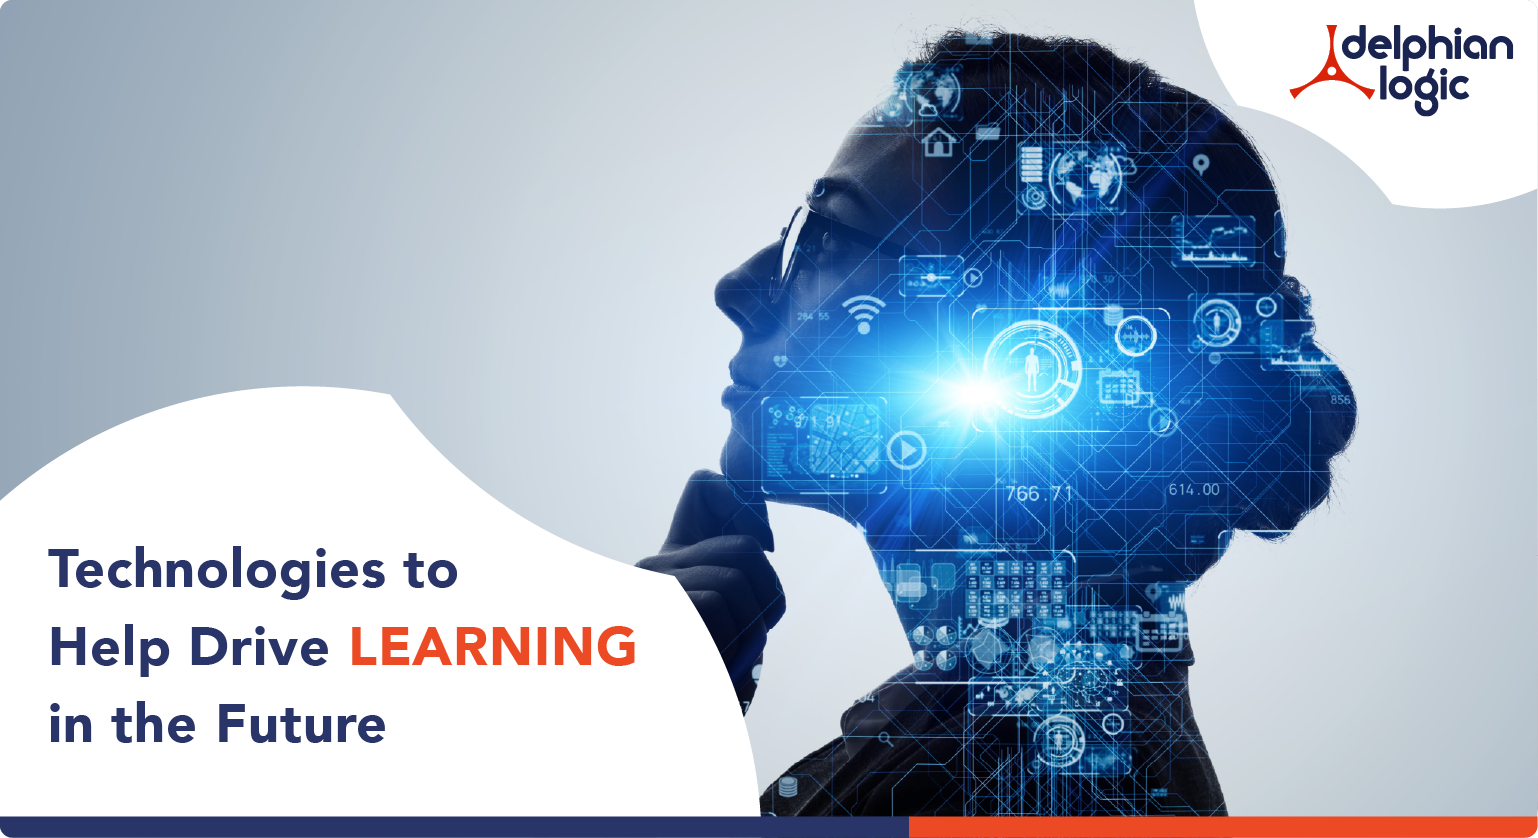 Technologies to Help Drive Learning in the Future